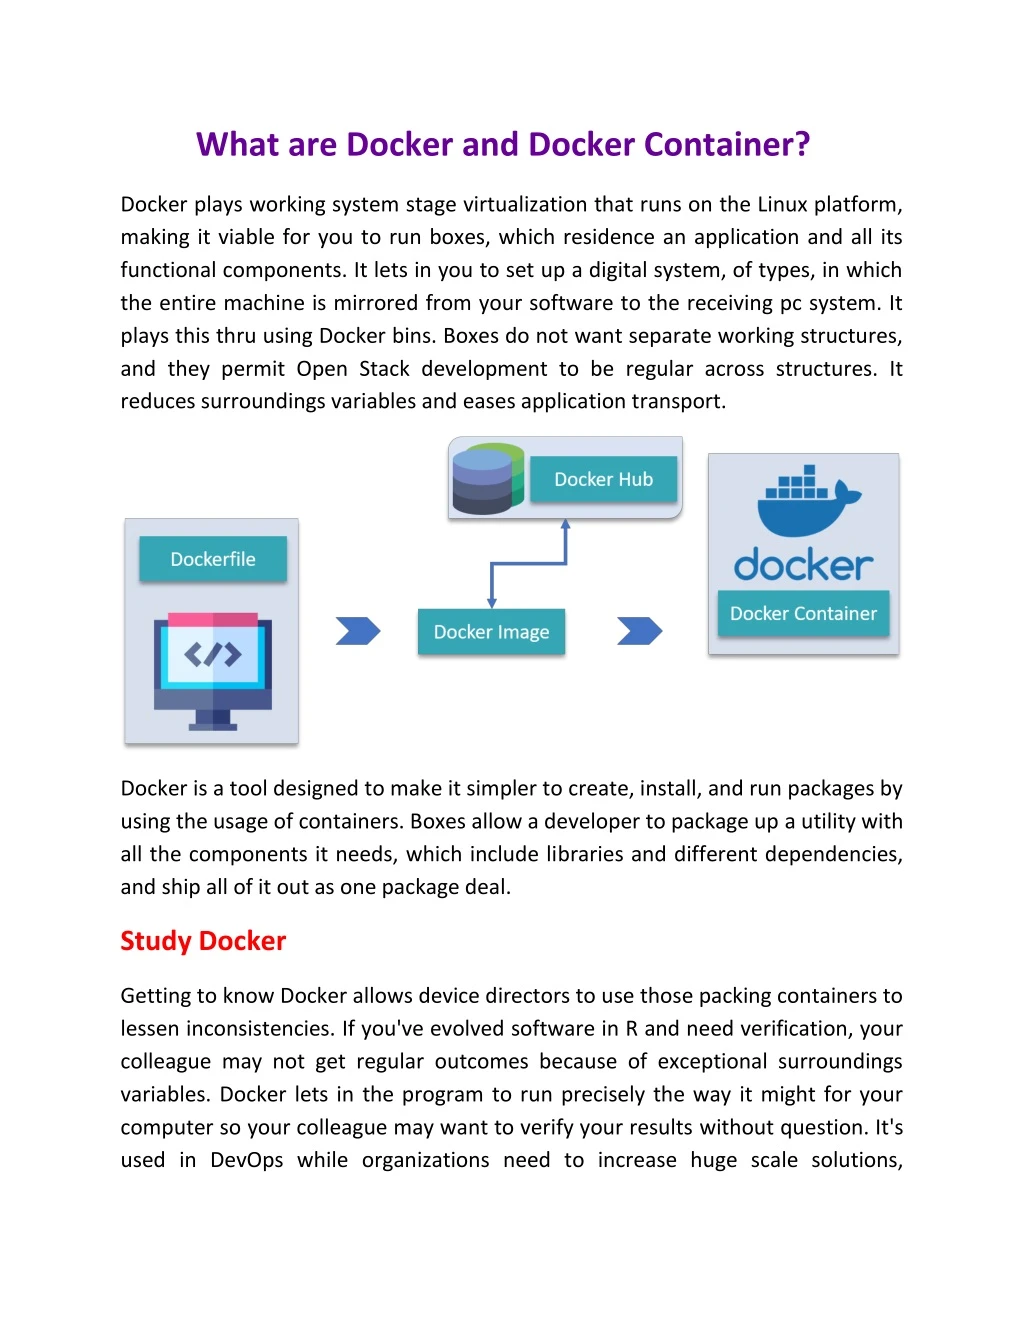 what are docker and docker container